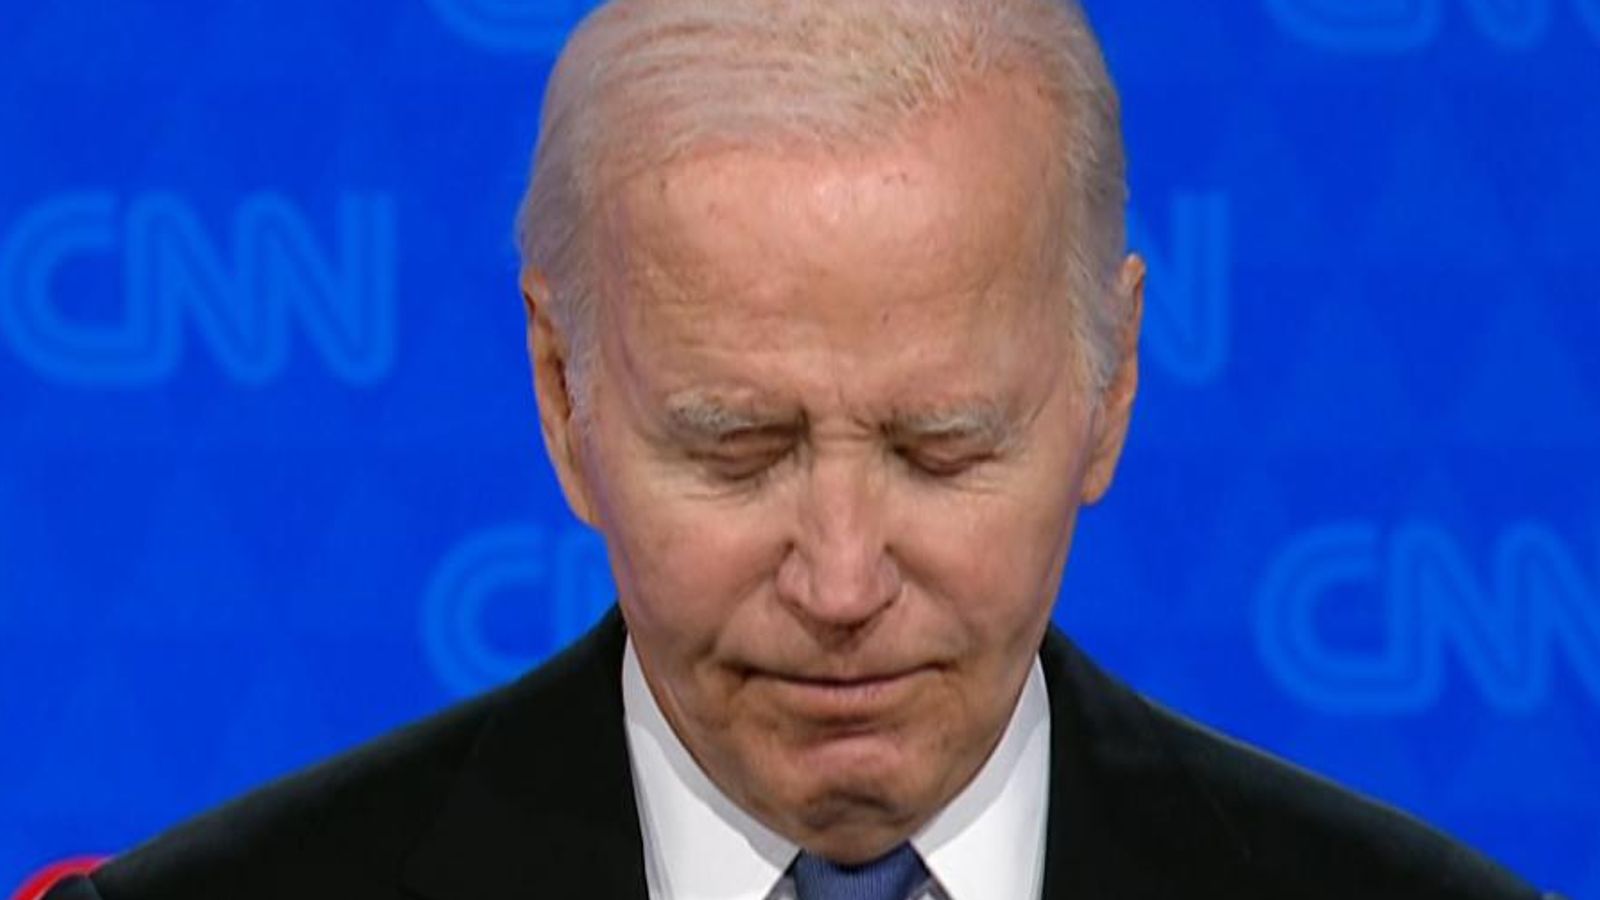 'No one is pushing me out': Joe Biden defiantly vows to stay in presidential race